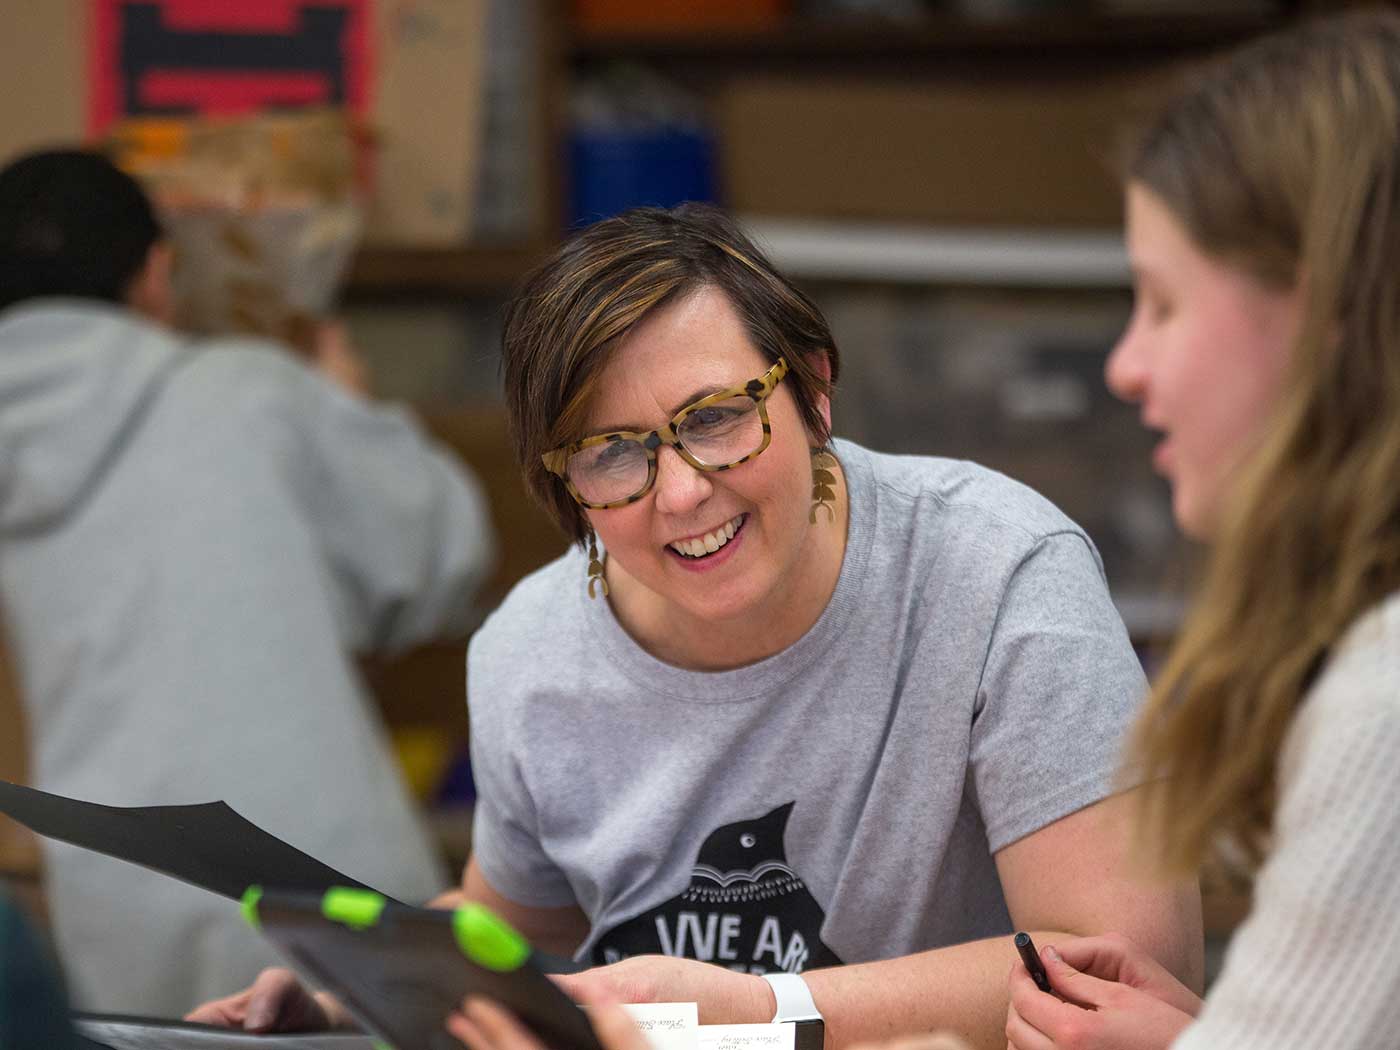 Baker teachers provide the tools for students to thrive